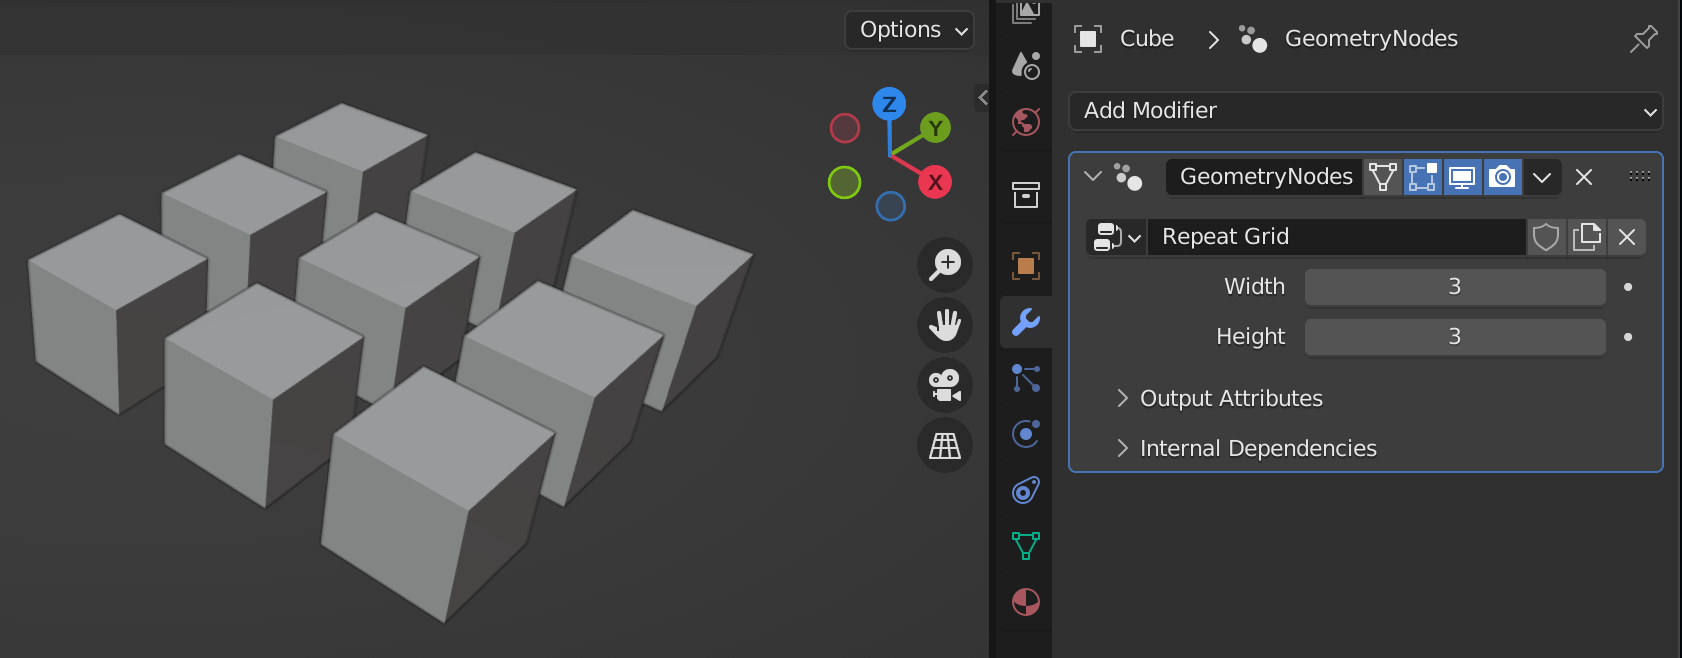 A screenshot of the Blender window with a 3x3 grid of cubes on the left and a Geometry Nodes modifier with the Repeat Grid tree selected on the right